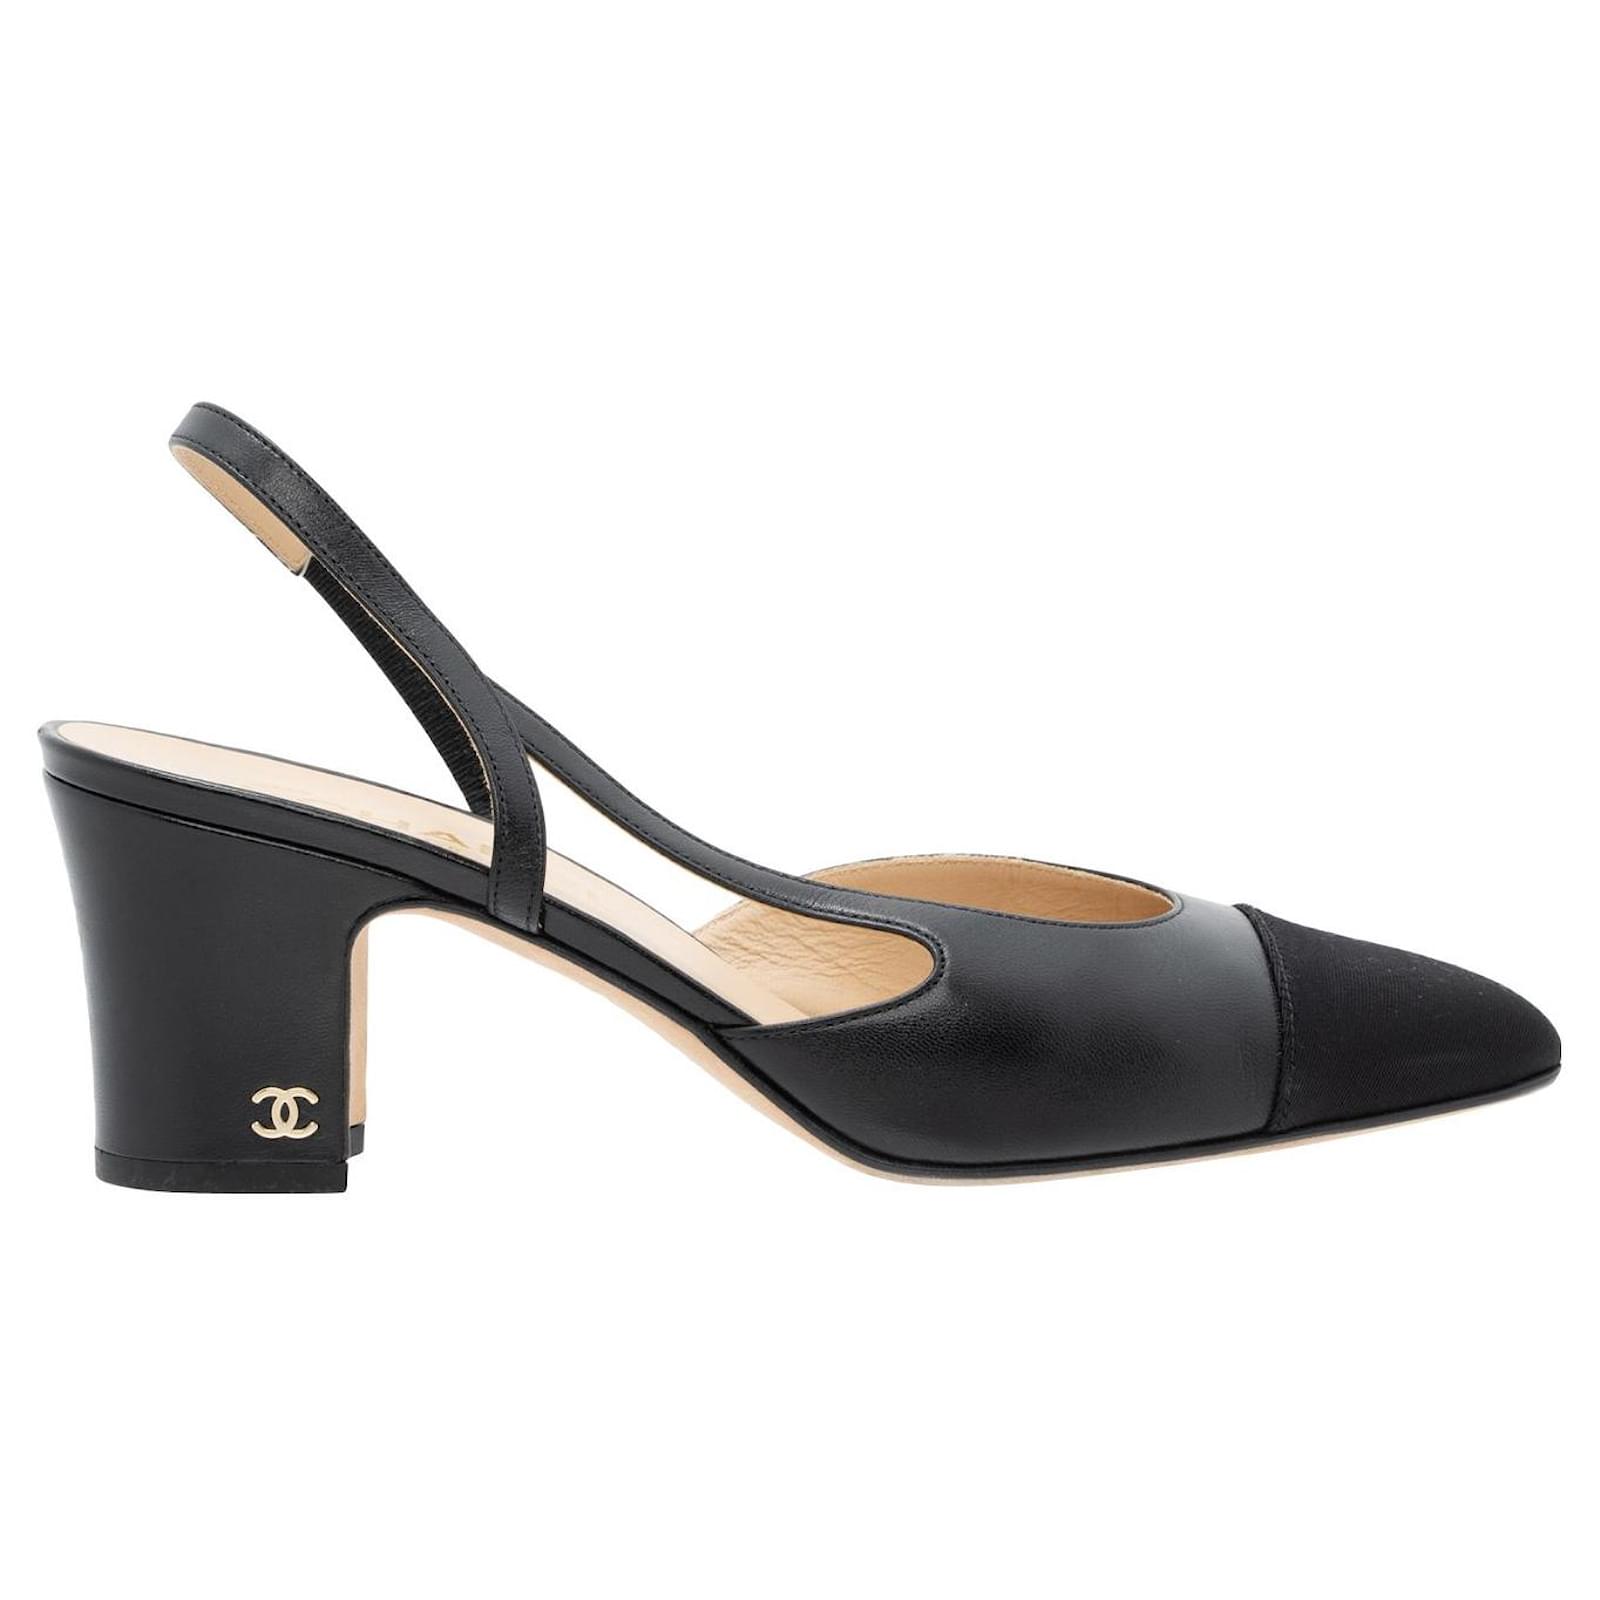 Chanel Patent Leather Cap Toe Slingback Pump - Chanel